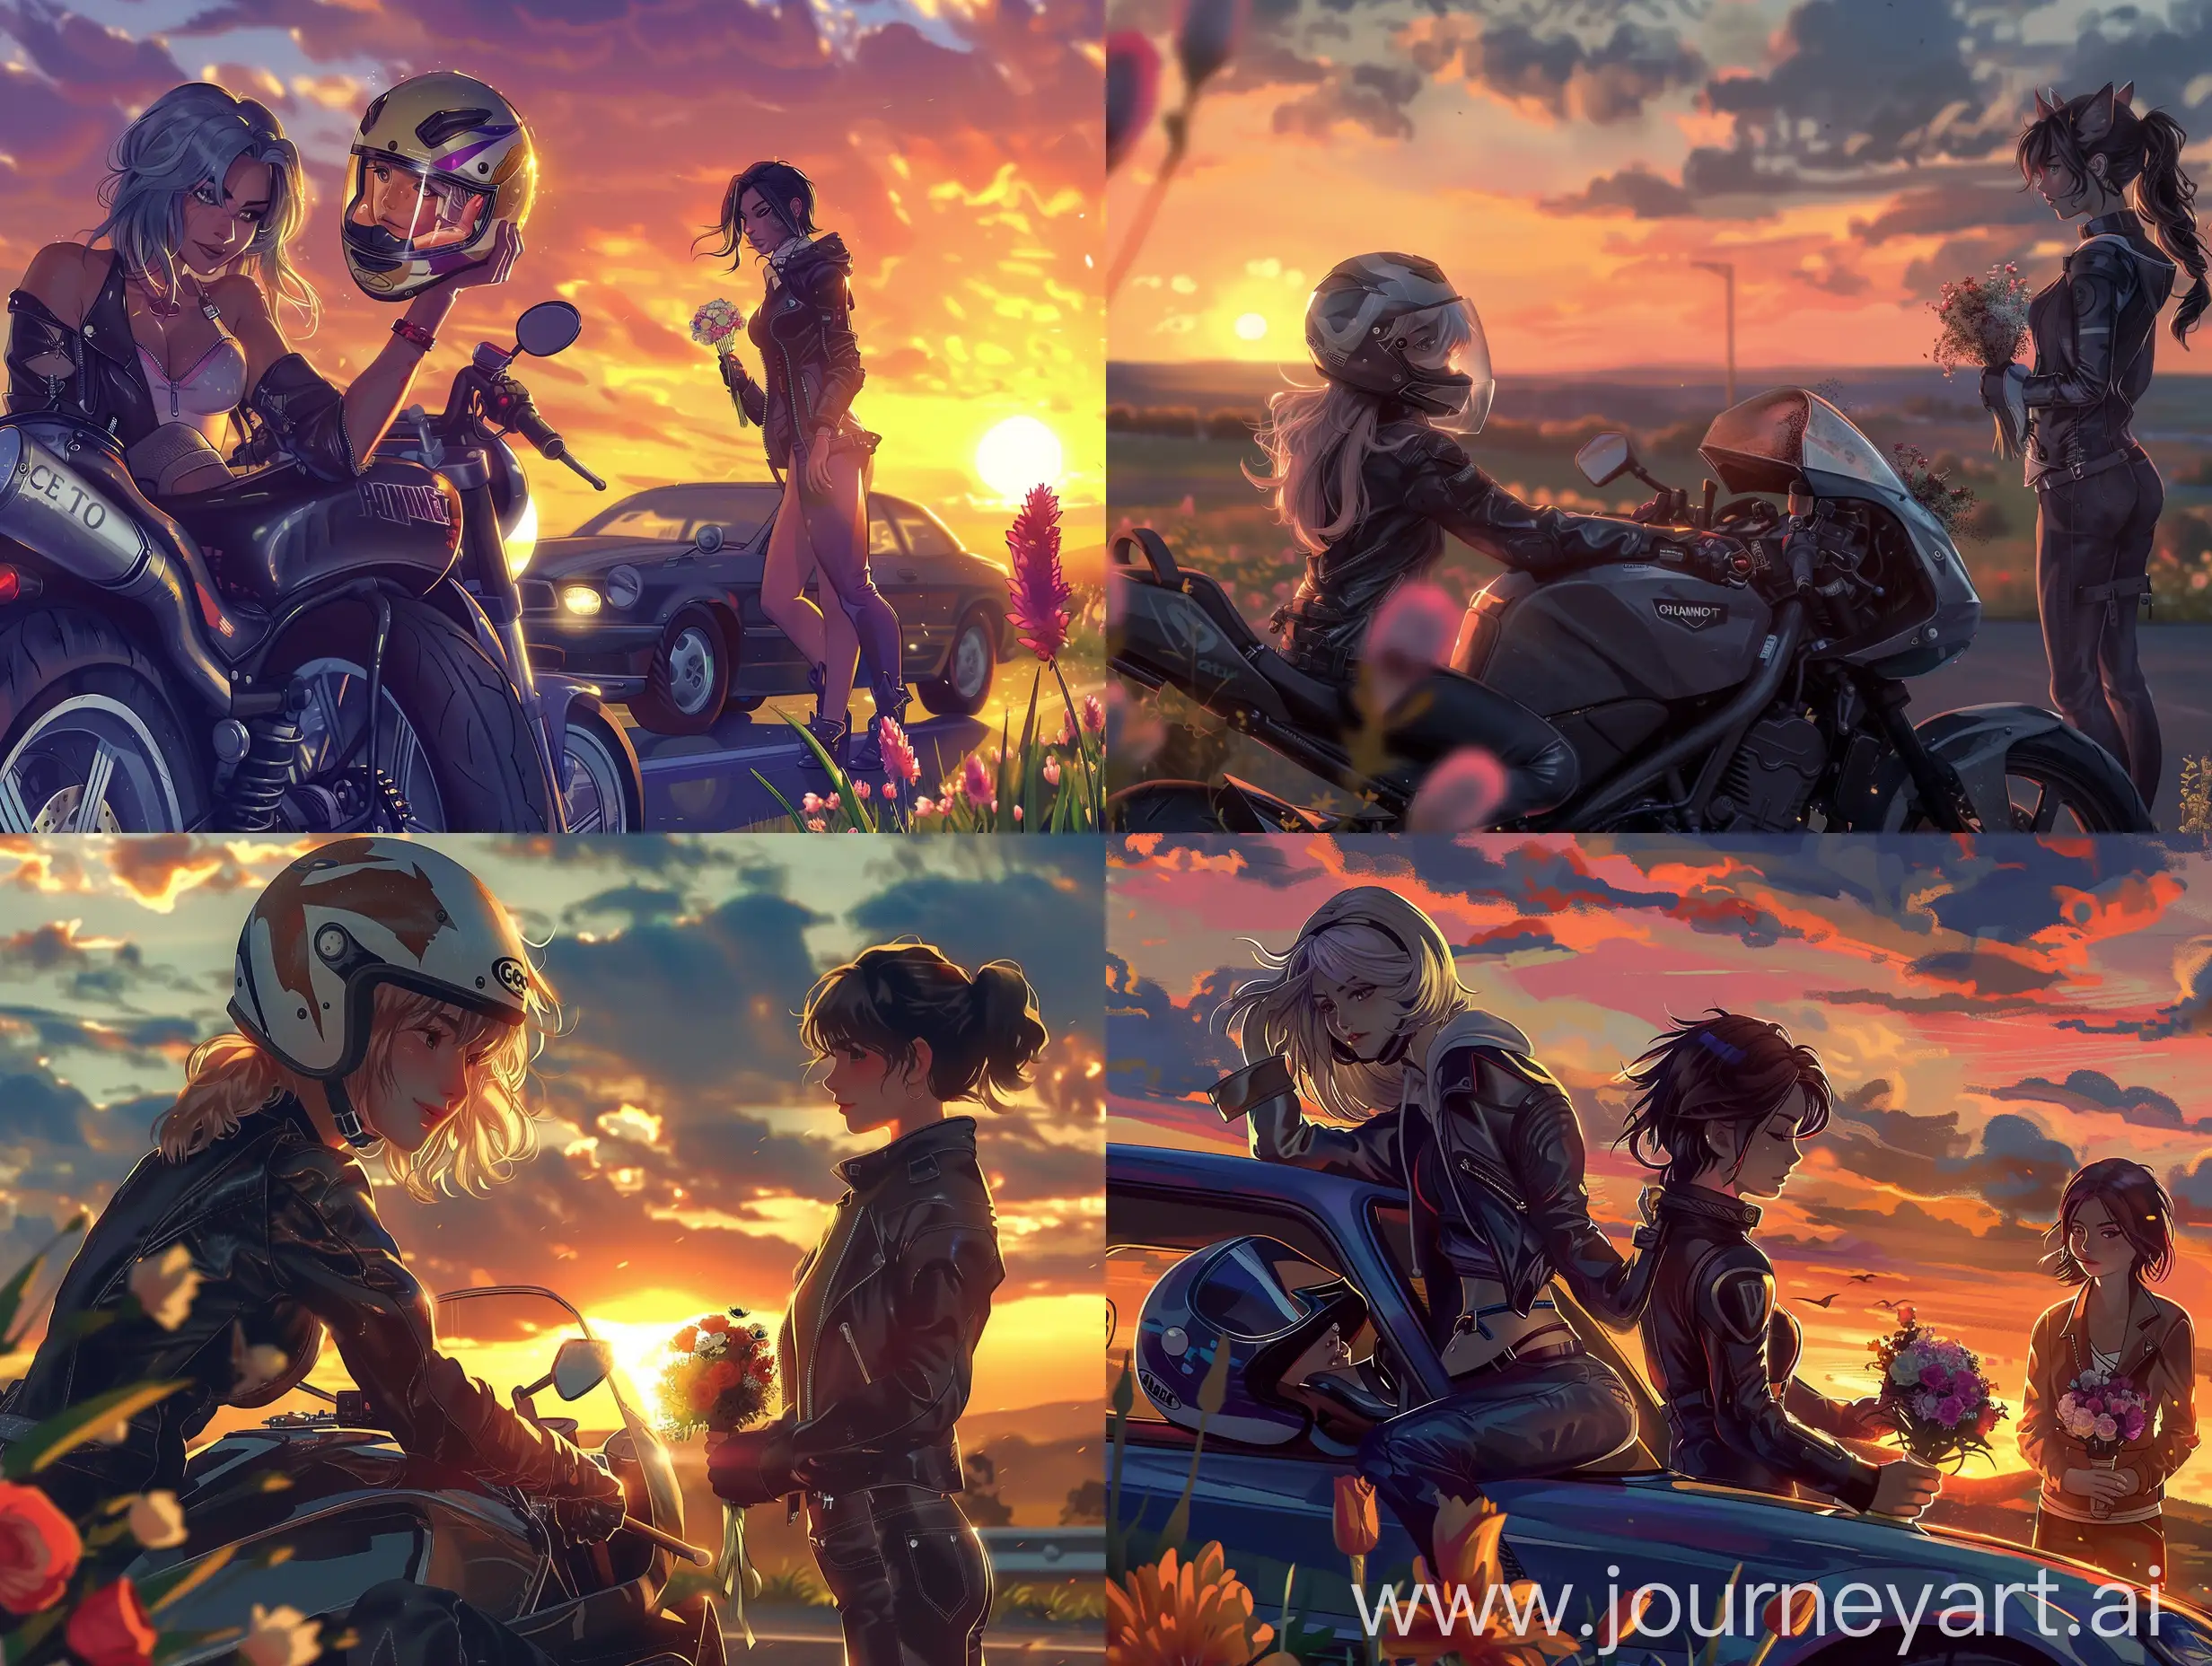 Coco-Bandicoot-Enjoys-Sunset-Ride-on-Motorcycle-with-Companion